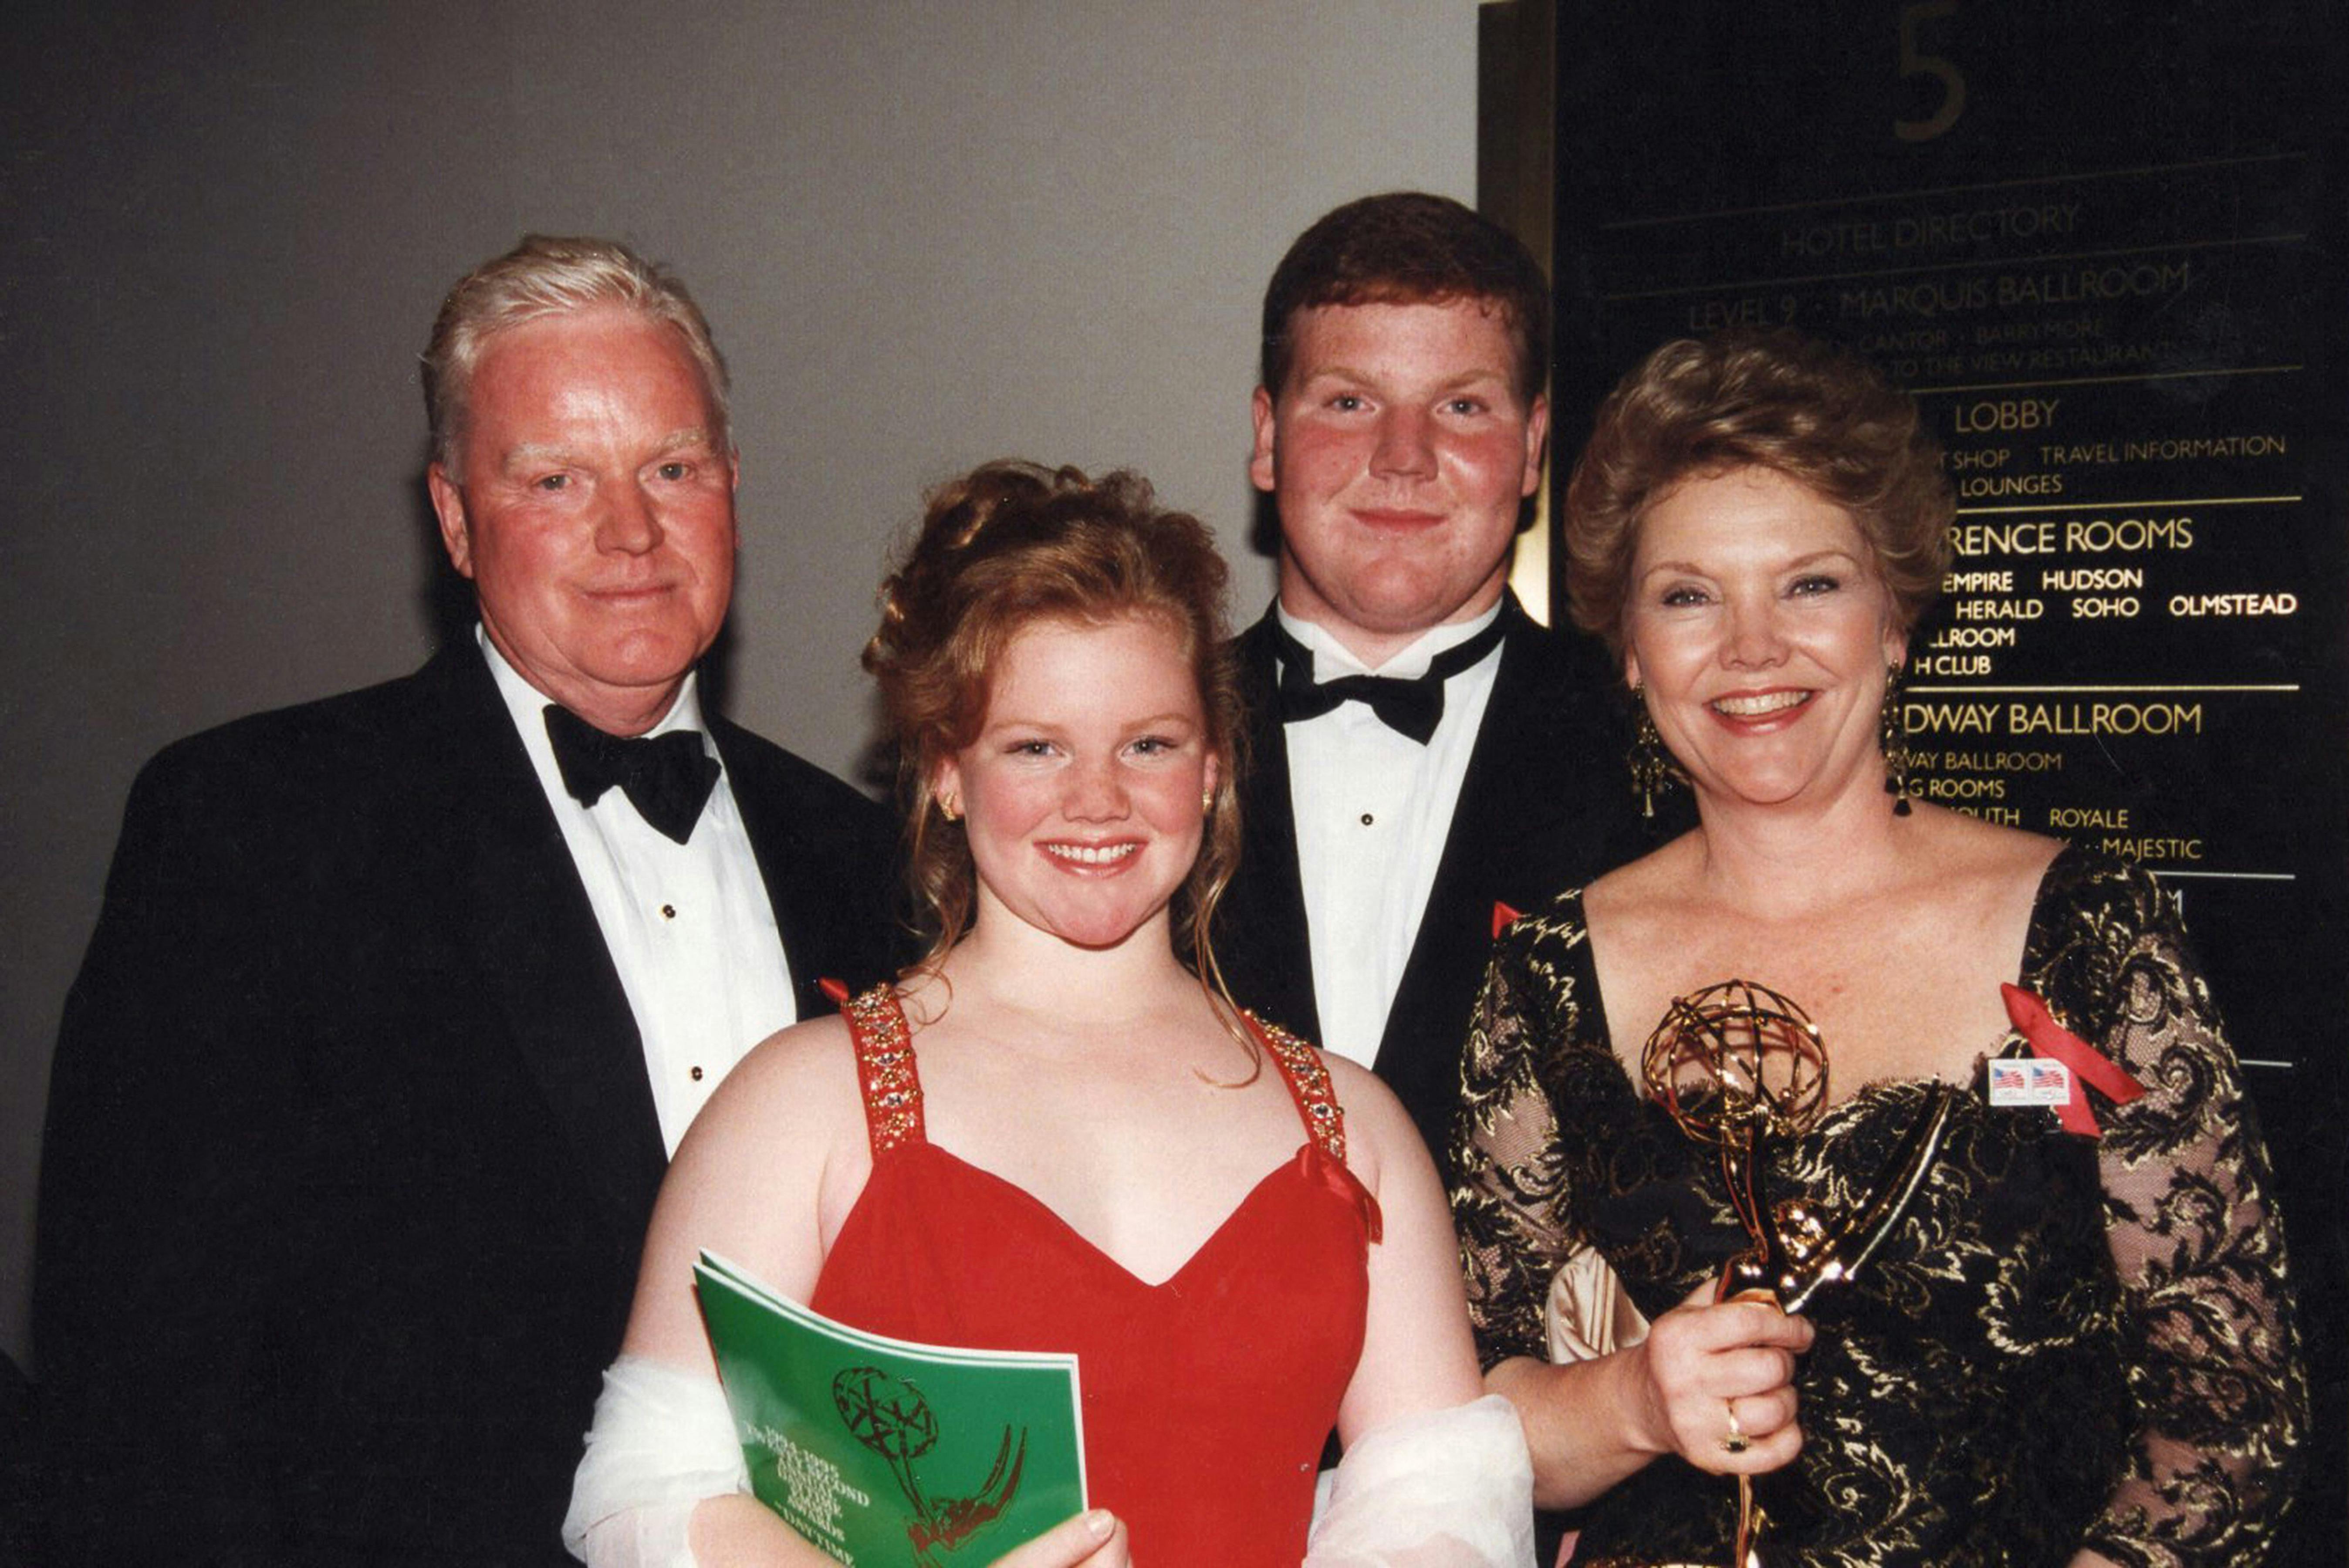 Archive images from the 90's of Erika Slezak, 